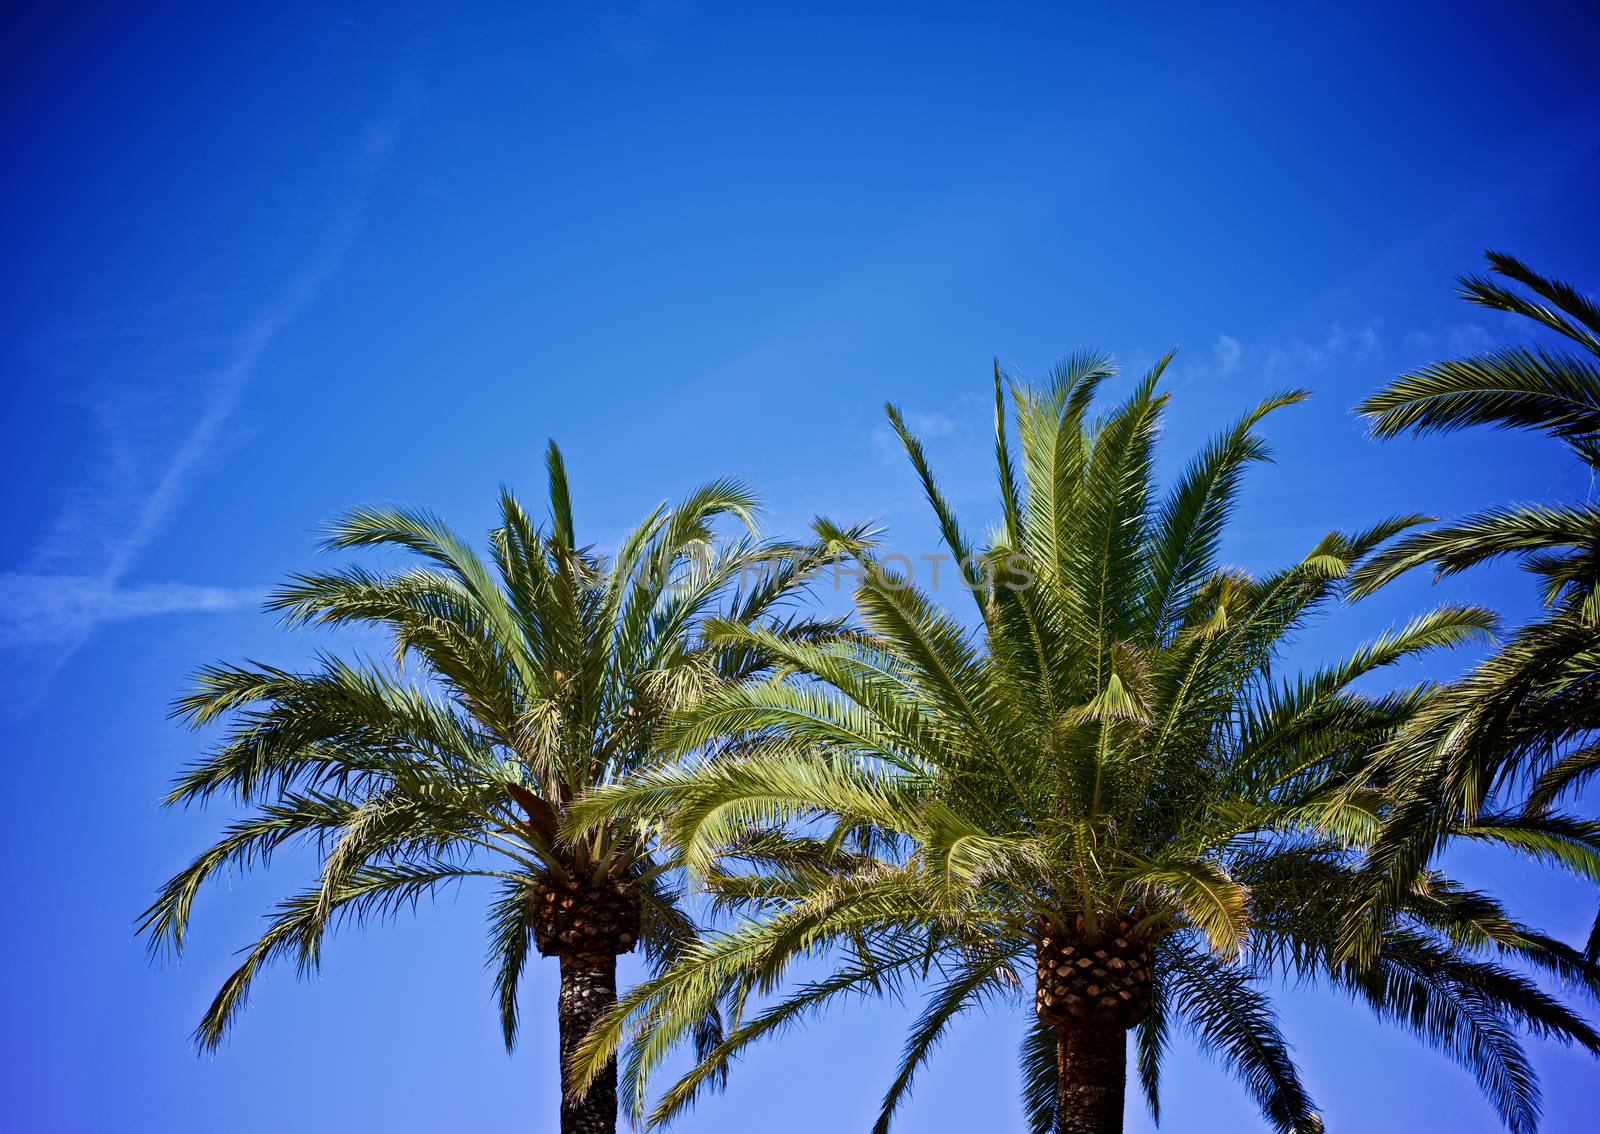 Beauty Palm Trees in Sunny Day on Bright Blue Sky background Outdoors